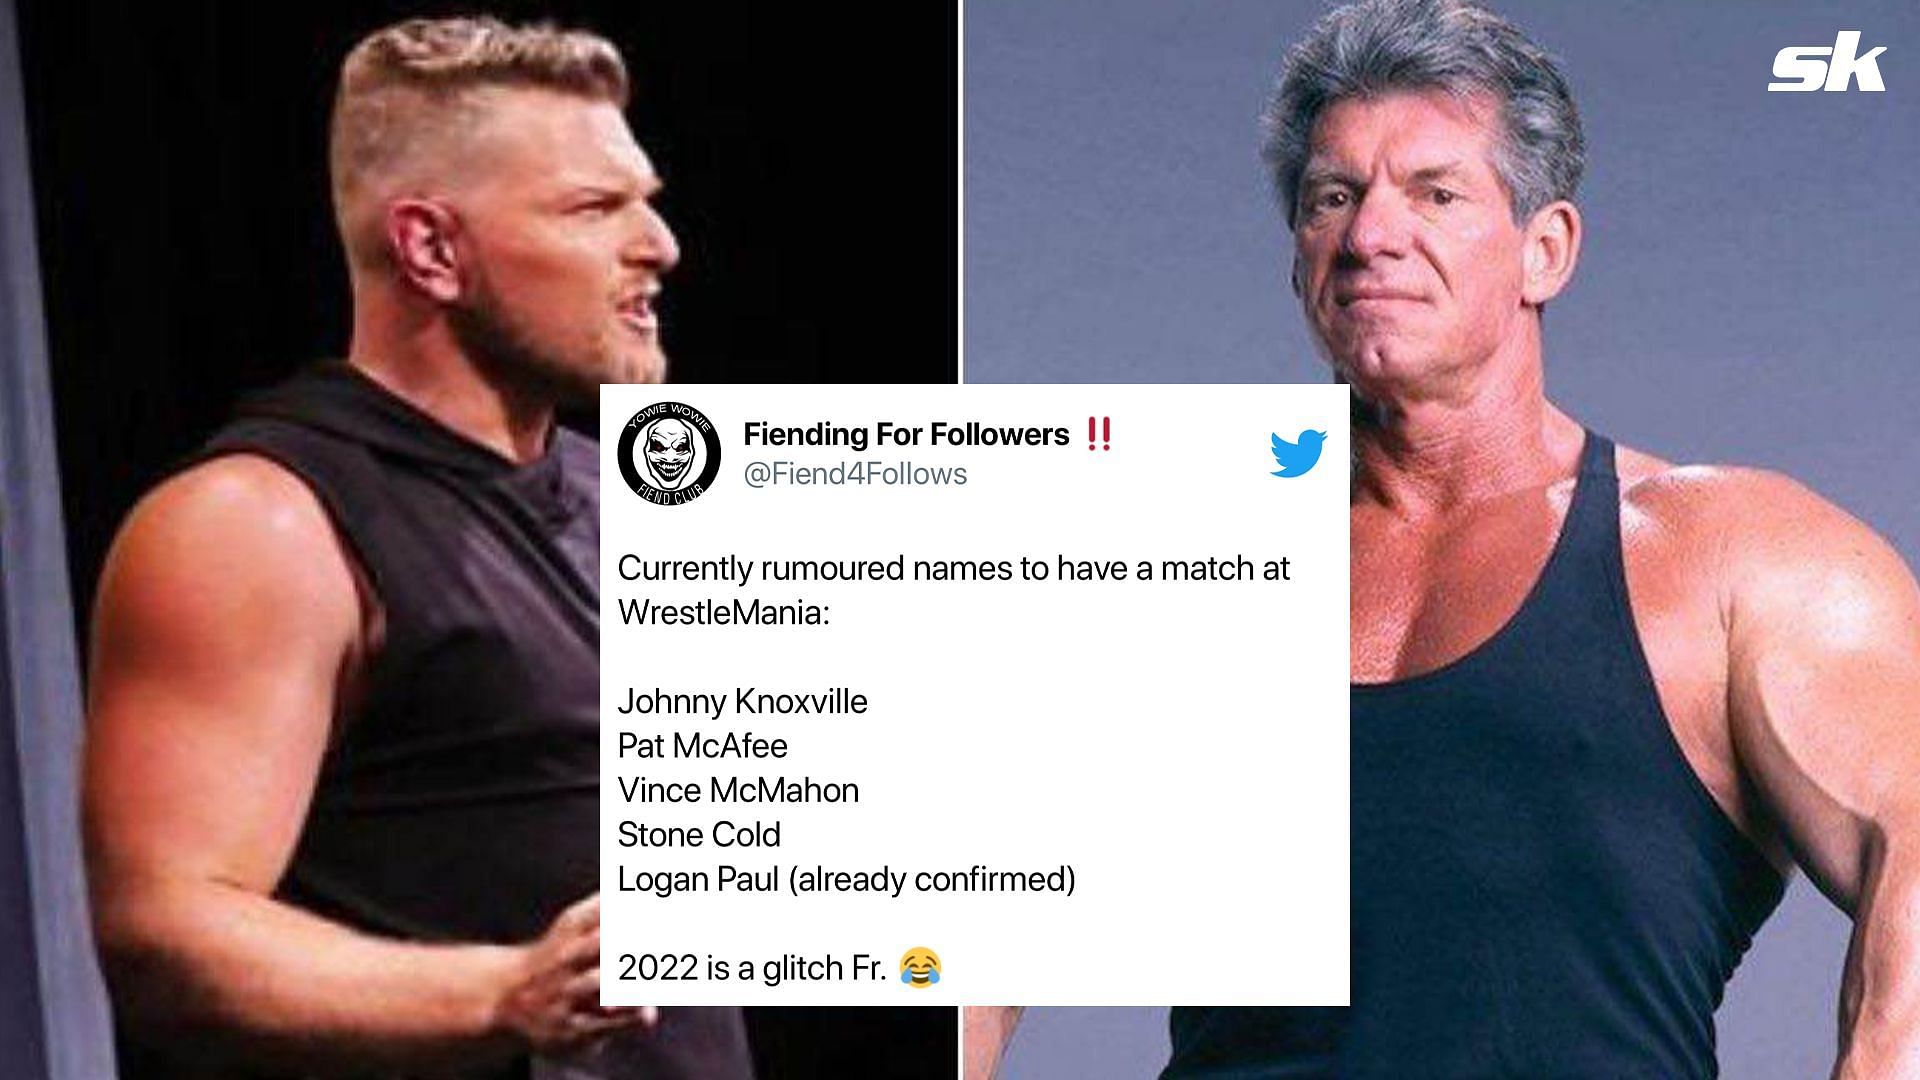 Will Pat McAffe really square off against Vince McMahon?